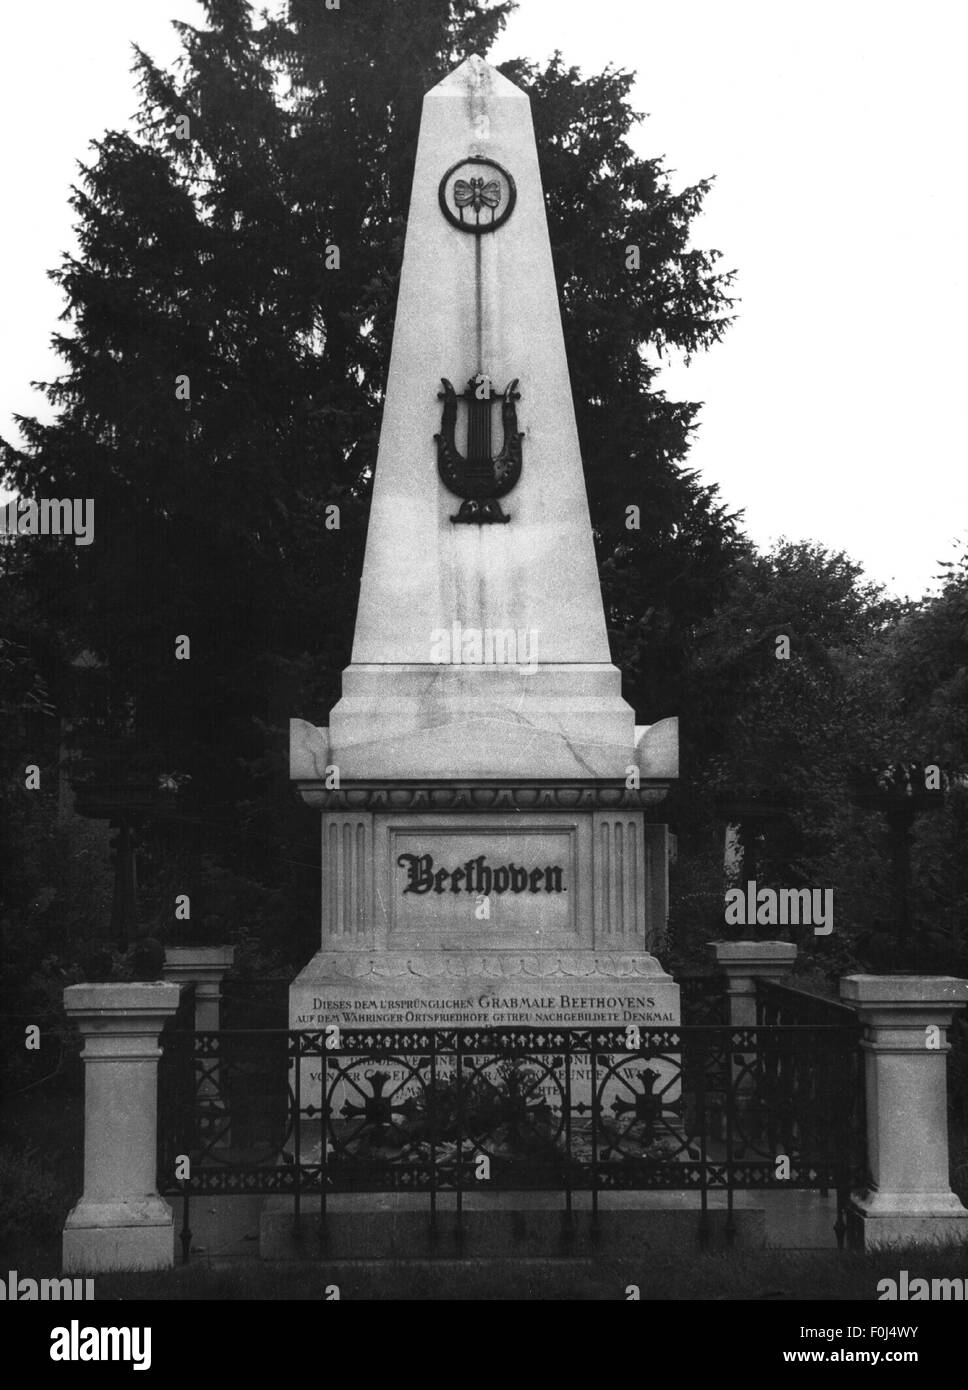 Beethoven, Ludwig van, 17.12.1770 - 26.3.1827, German composer, his grave at Central Cermetery, Vienna, Austria, Stock Photo